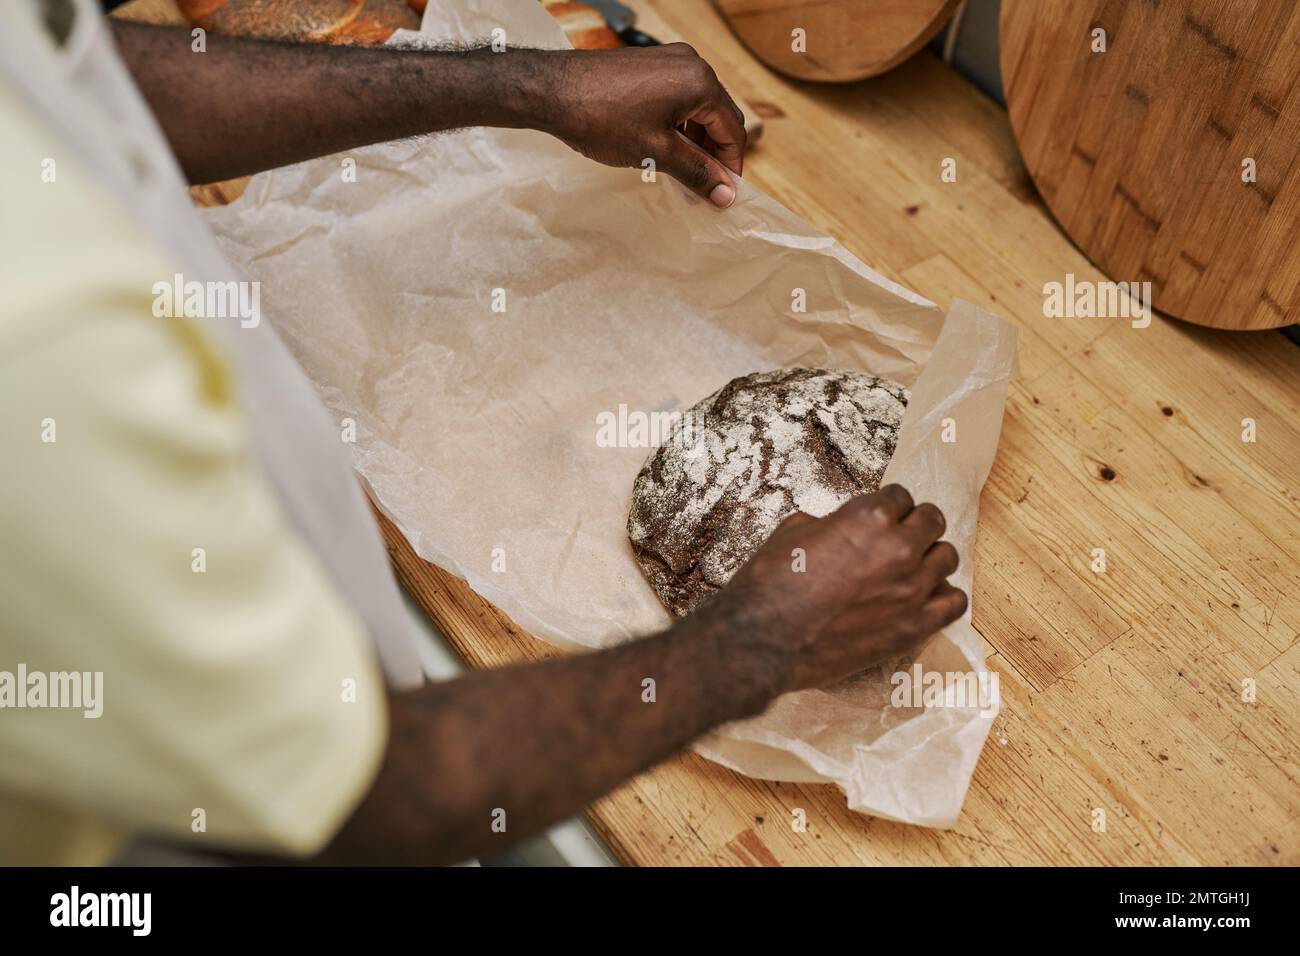 Hands of bakery worker wrapping loaf of rye bread in paper Stock Photo